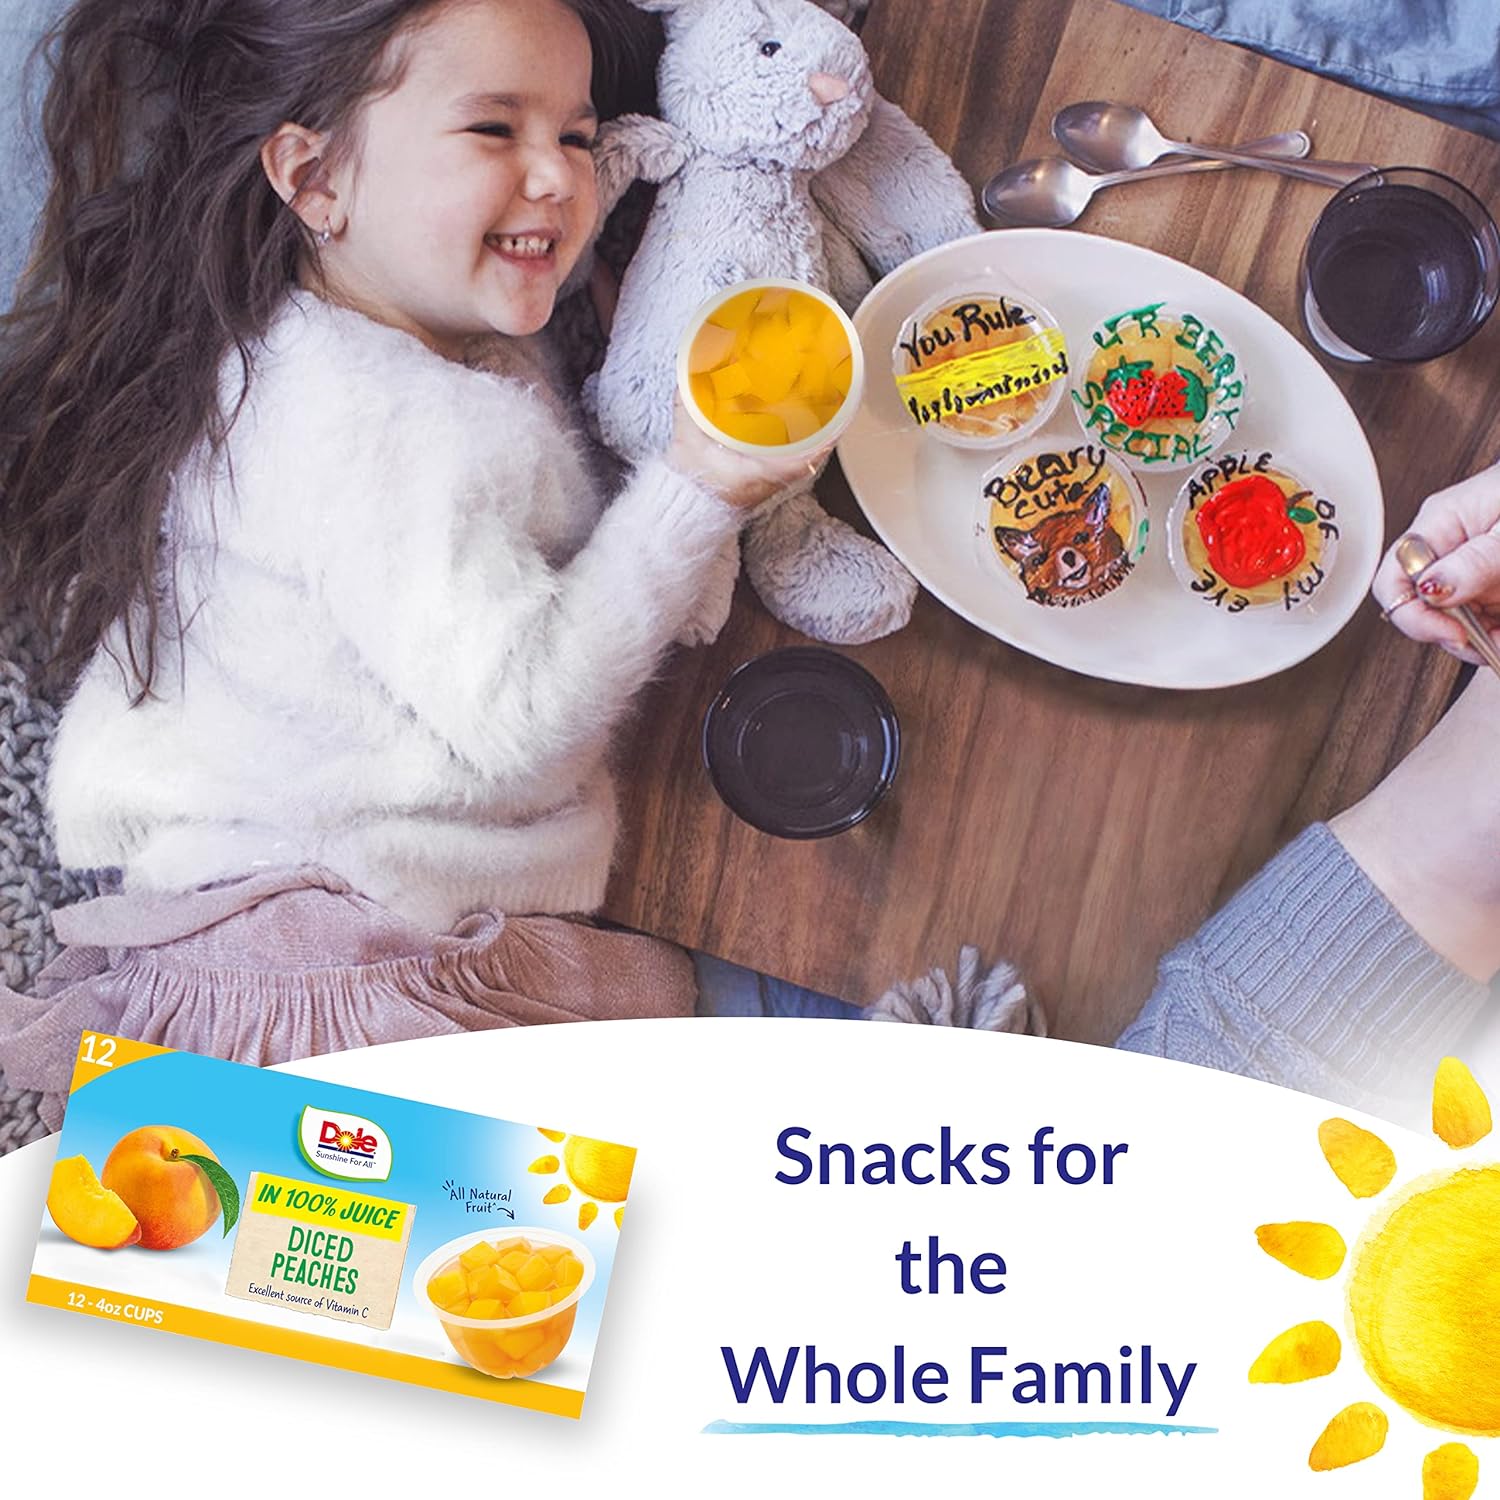 Dole Fruit Bowls Diced Peaches in 100% Juice Snacks, 4oz 12 Total Cups, Gluten & Dairy Free, Bulk Lunch Snacks for Kids & Adults